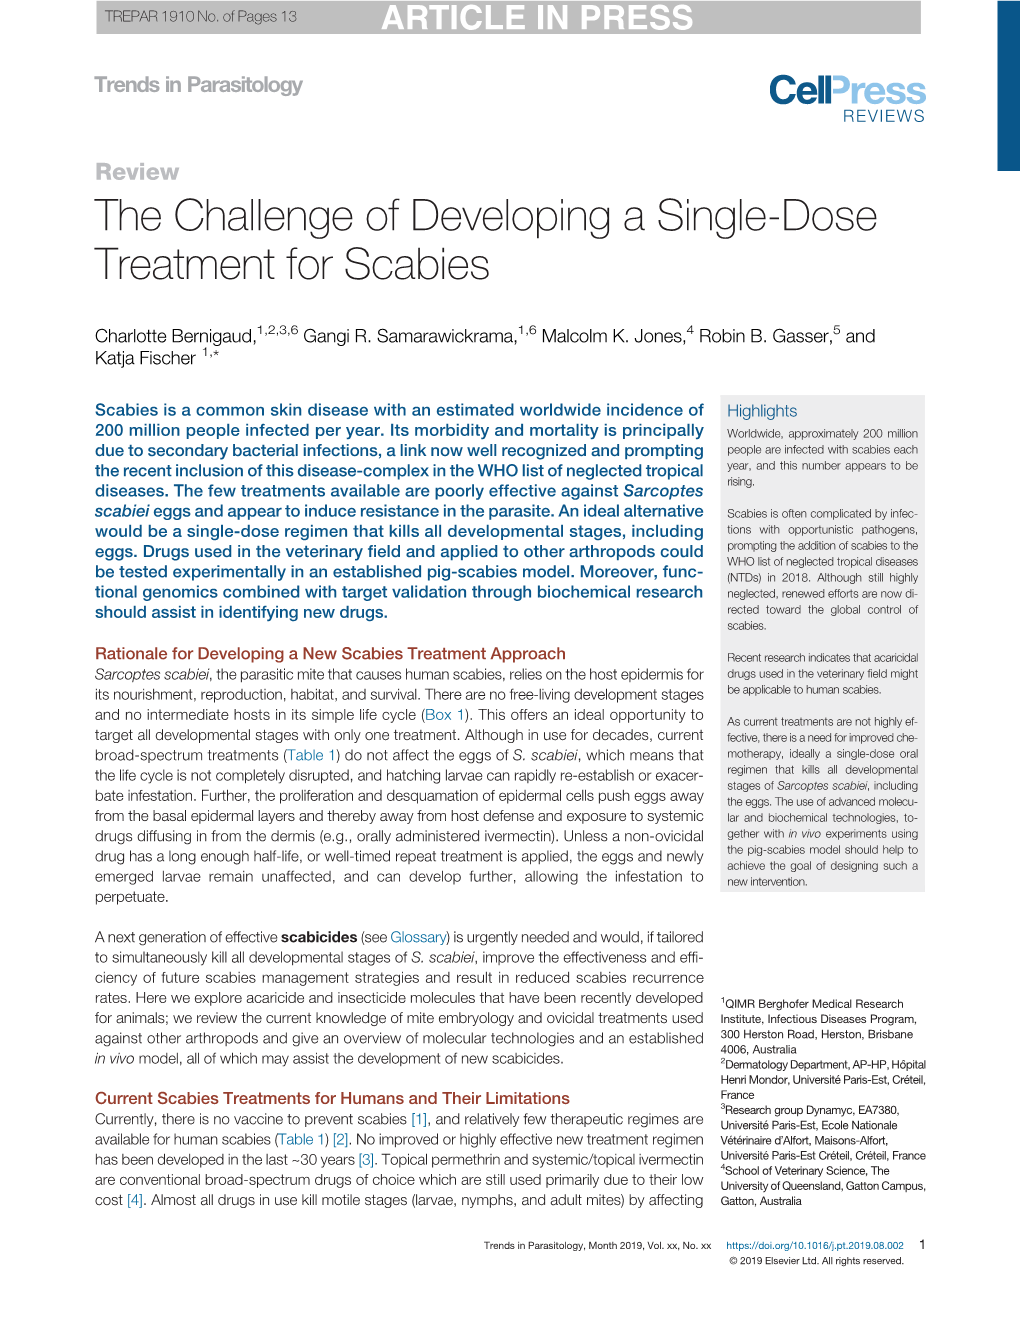 The Challenge of Developing a Single-Dose Treatment for Scabies